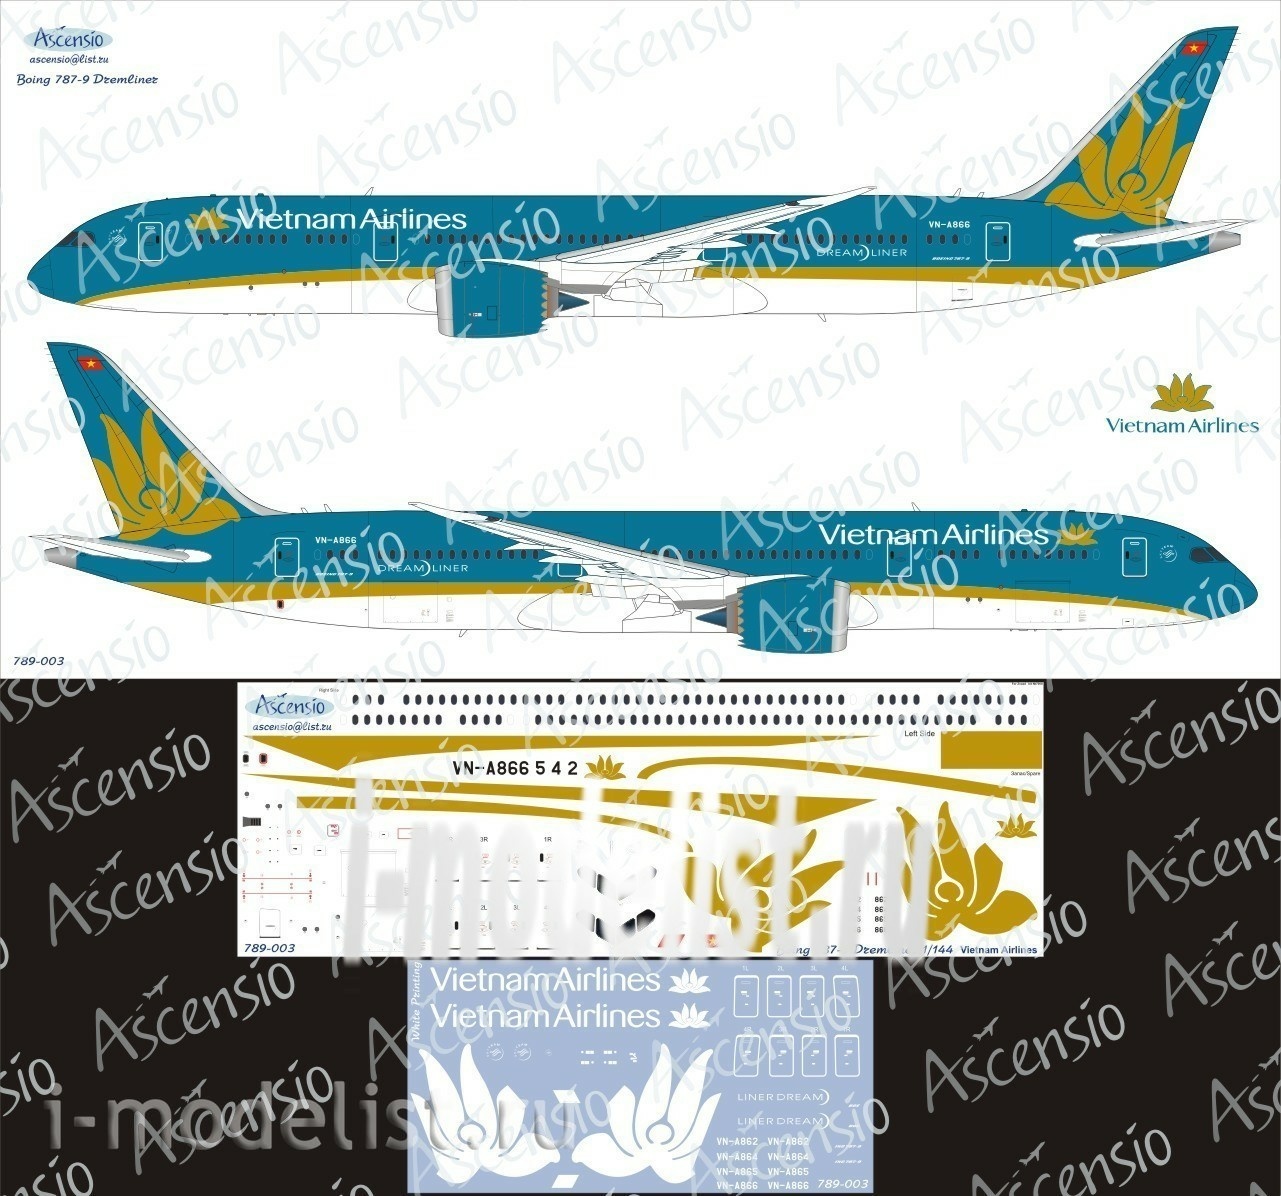 789-003 Ascensio 1/144 Scales the Decal on the plane Boeng 787-9 (Vietnam Airlines)